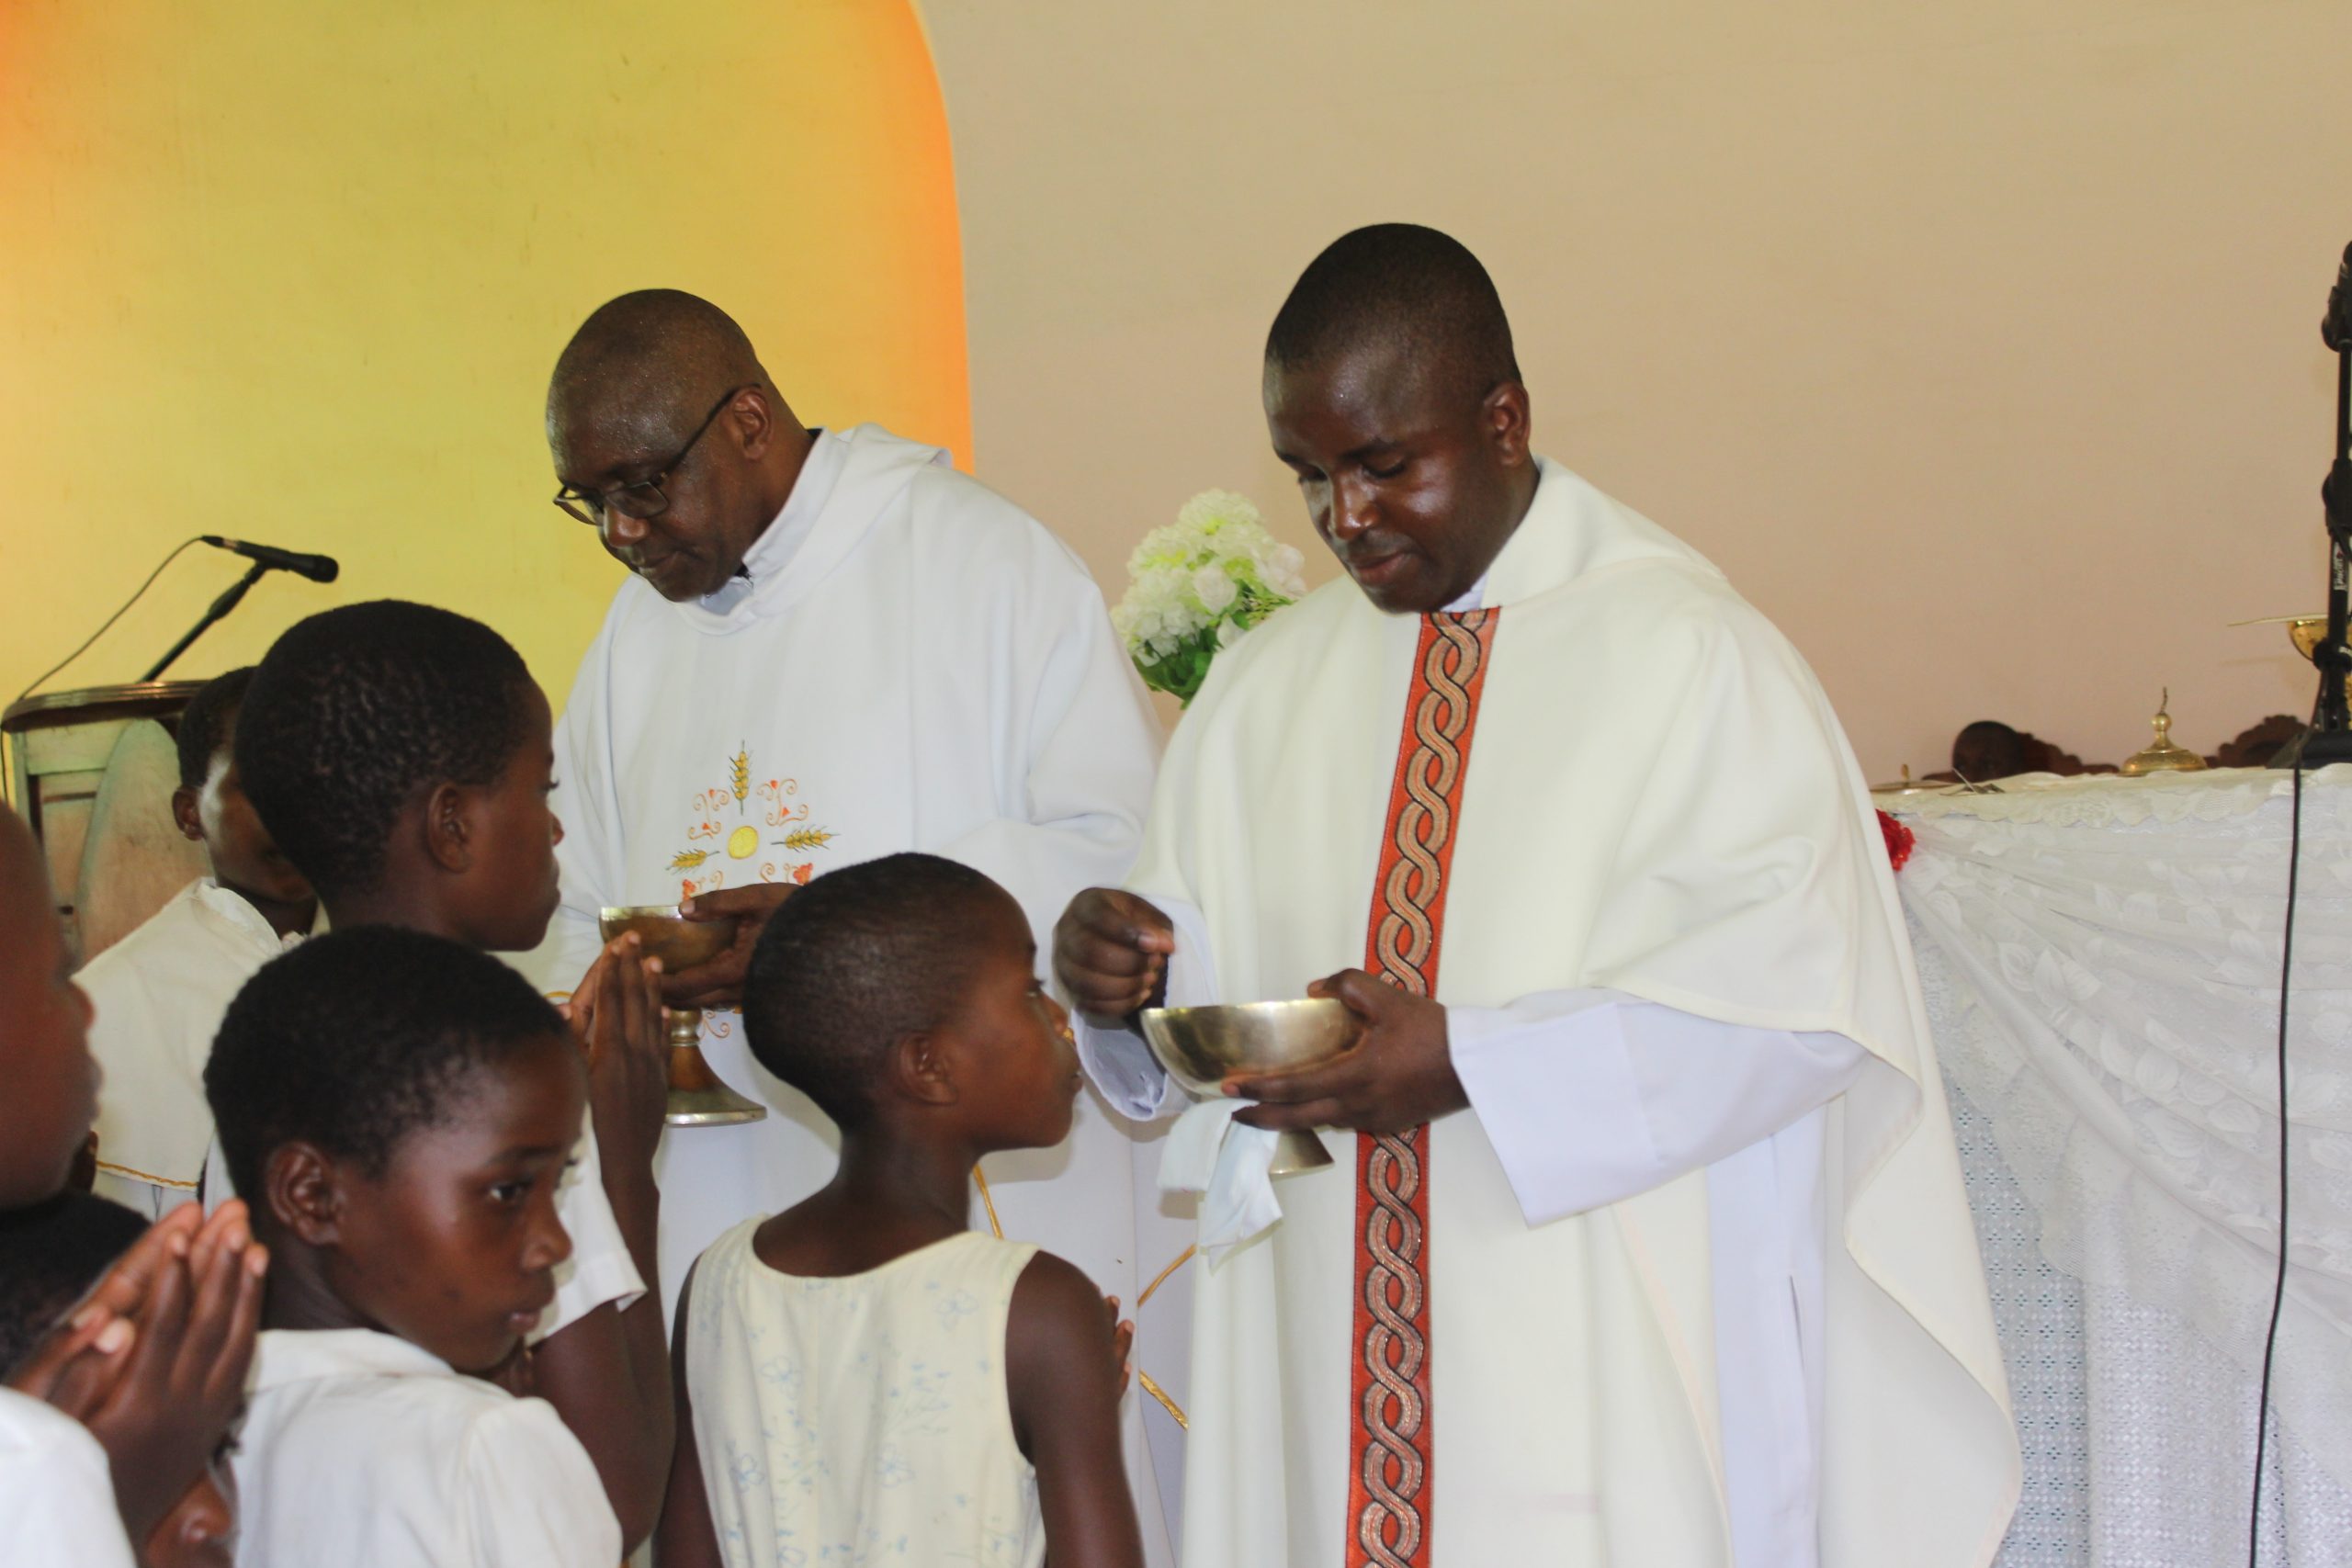 The Vicar General (in specs) and Father Simwela distributing communion during the event